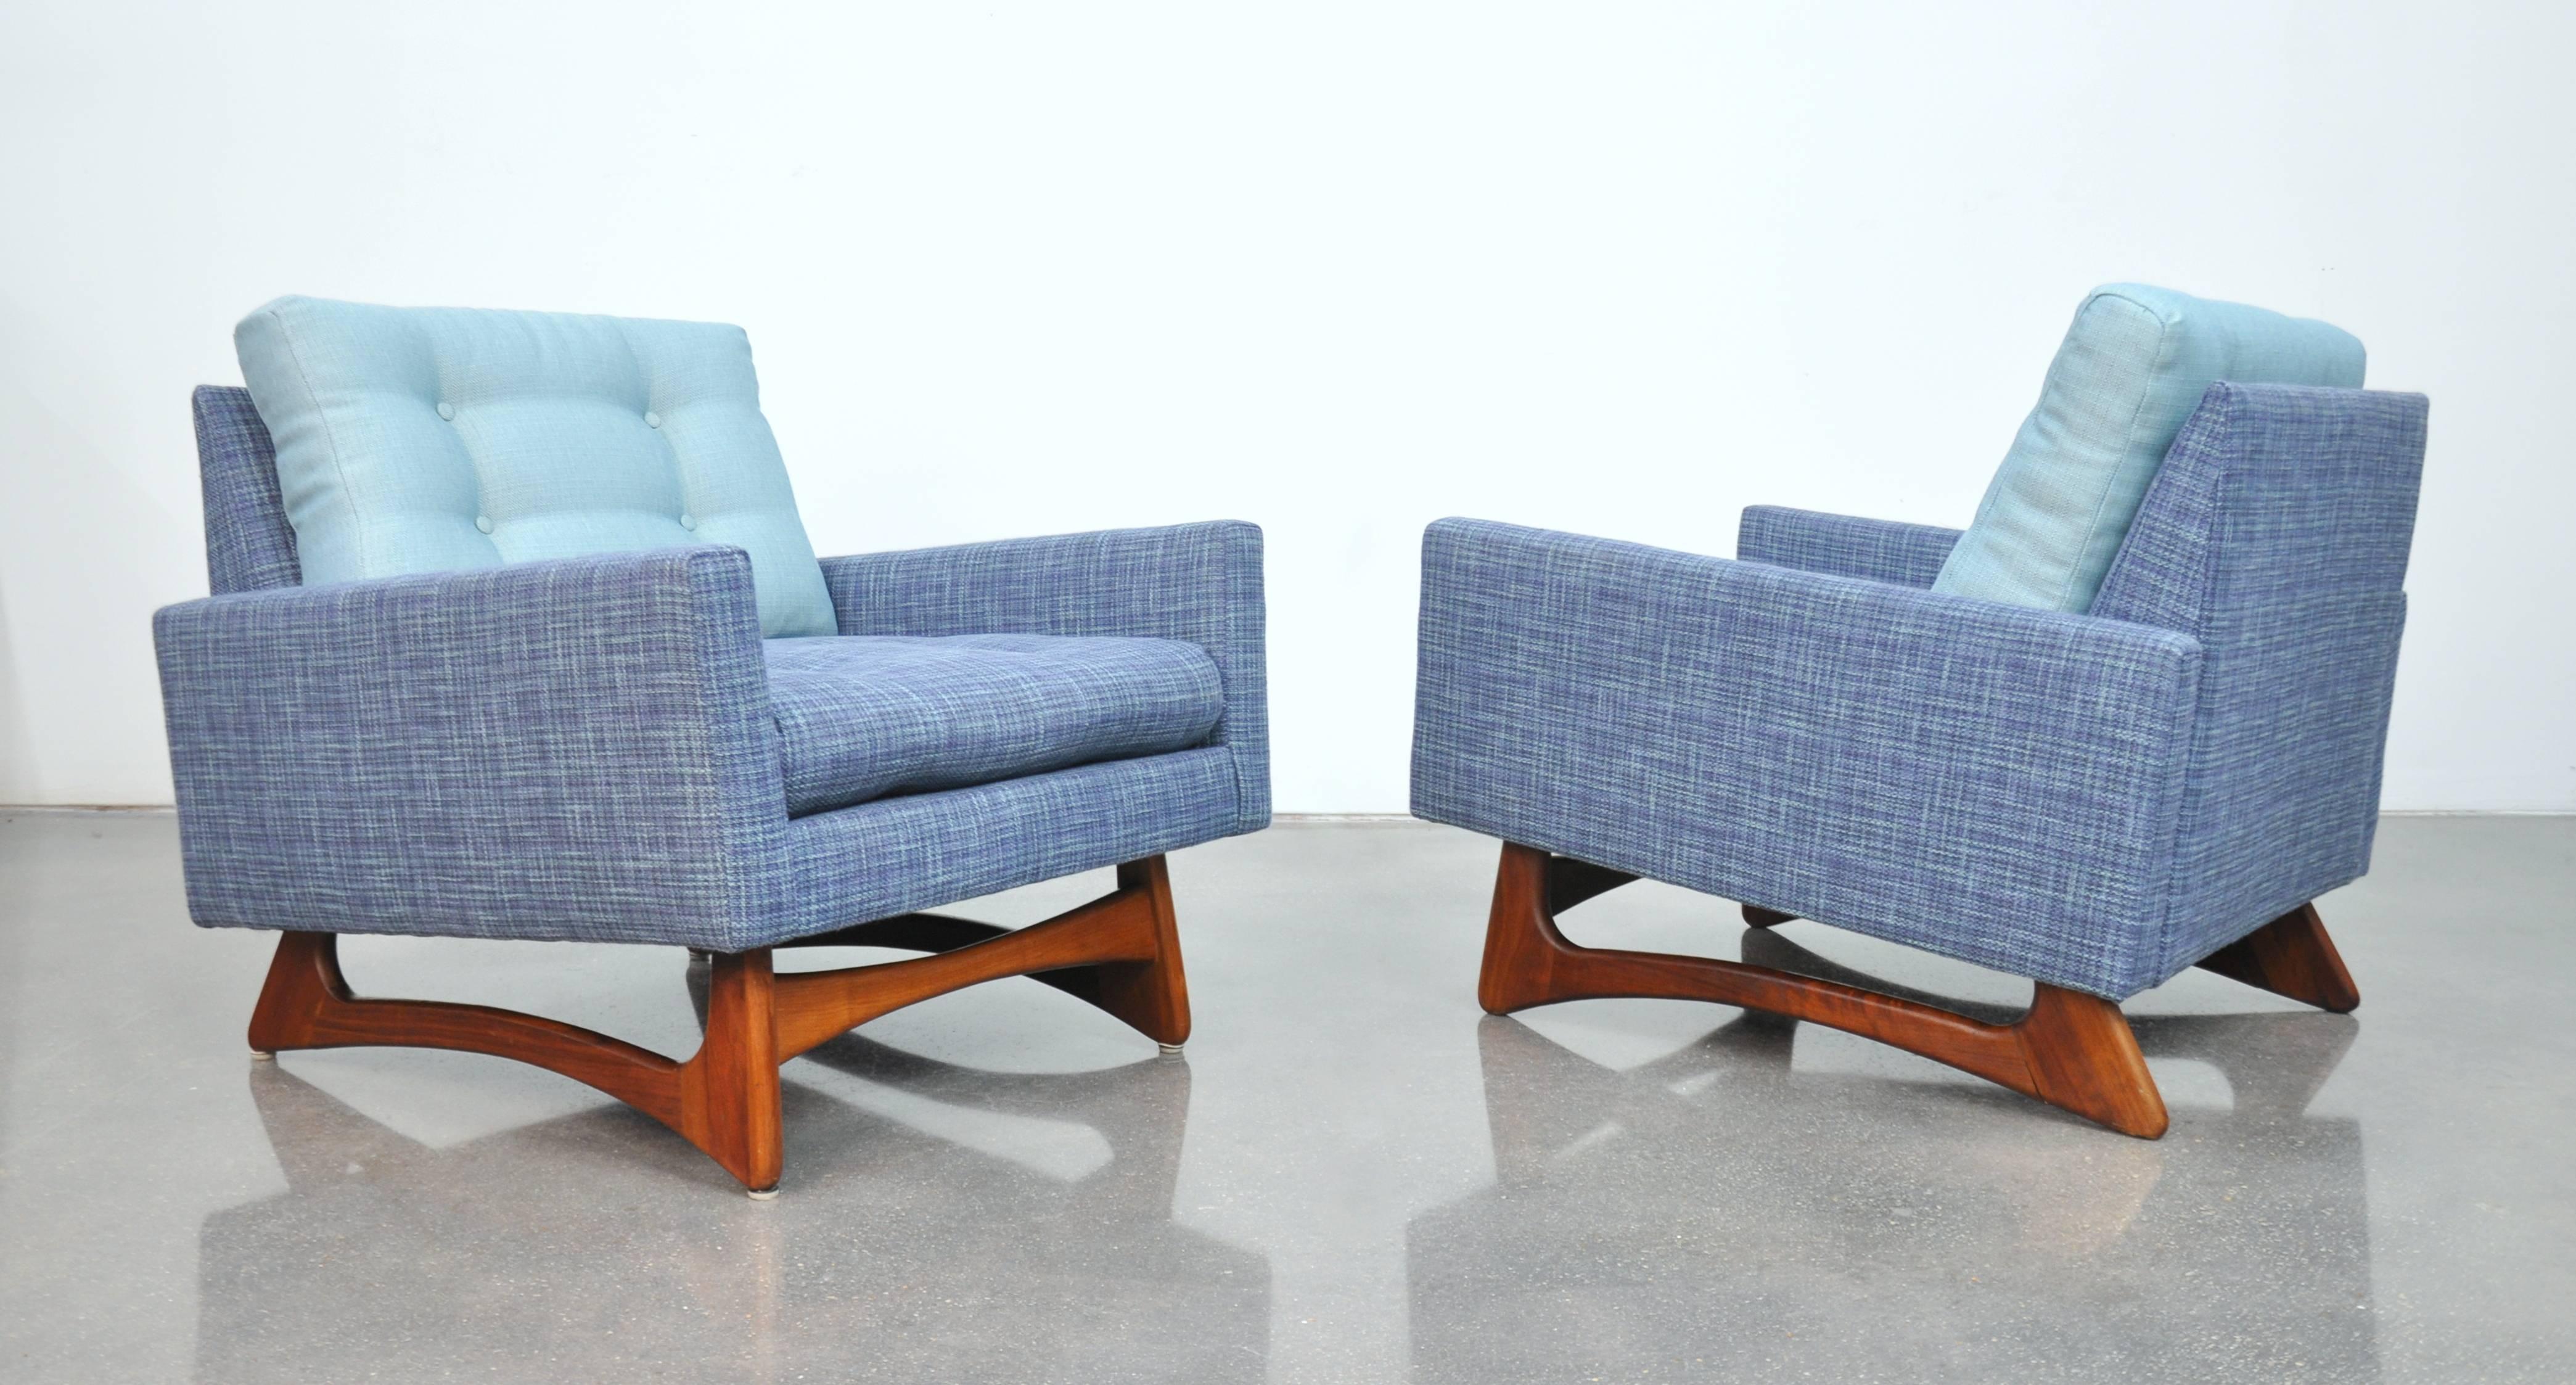 American Pair of Adrian Pearsall for Craft Associates Walnut and Blue Tweed Lounge Chairs